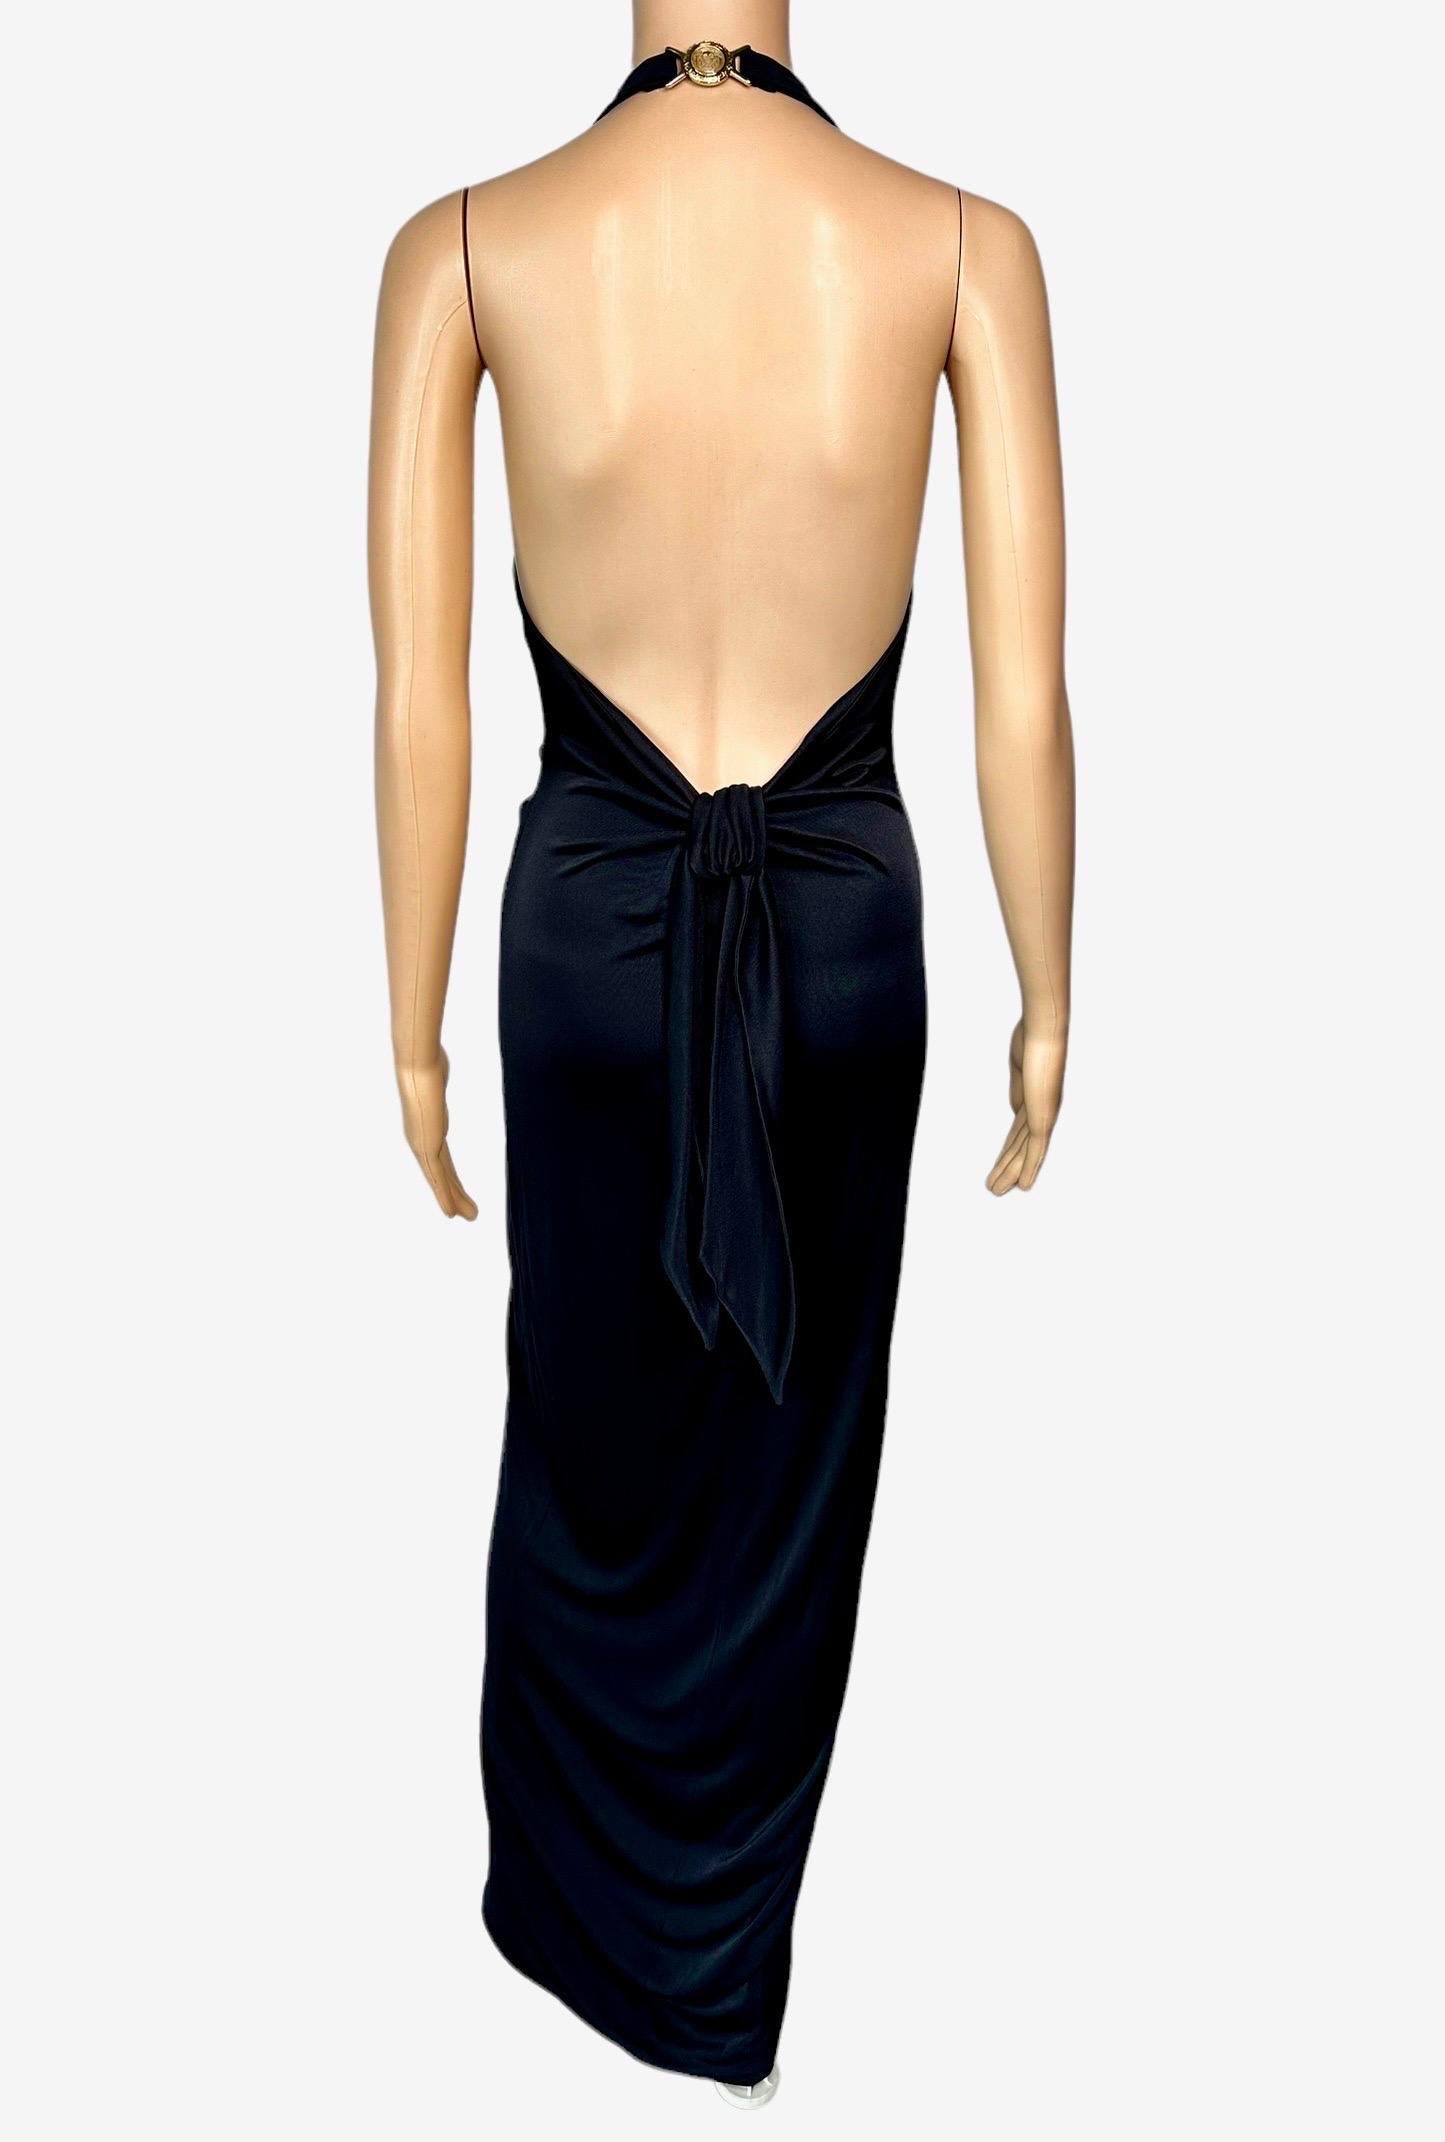 Black Versace S/S 2005 Runway Plunging Hi-Low Ruched Open Back Evening Dress Gown For Sale